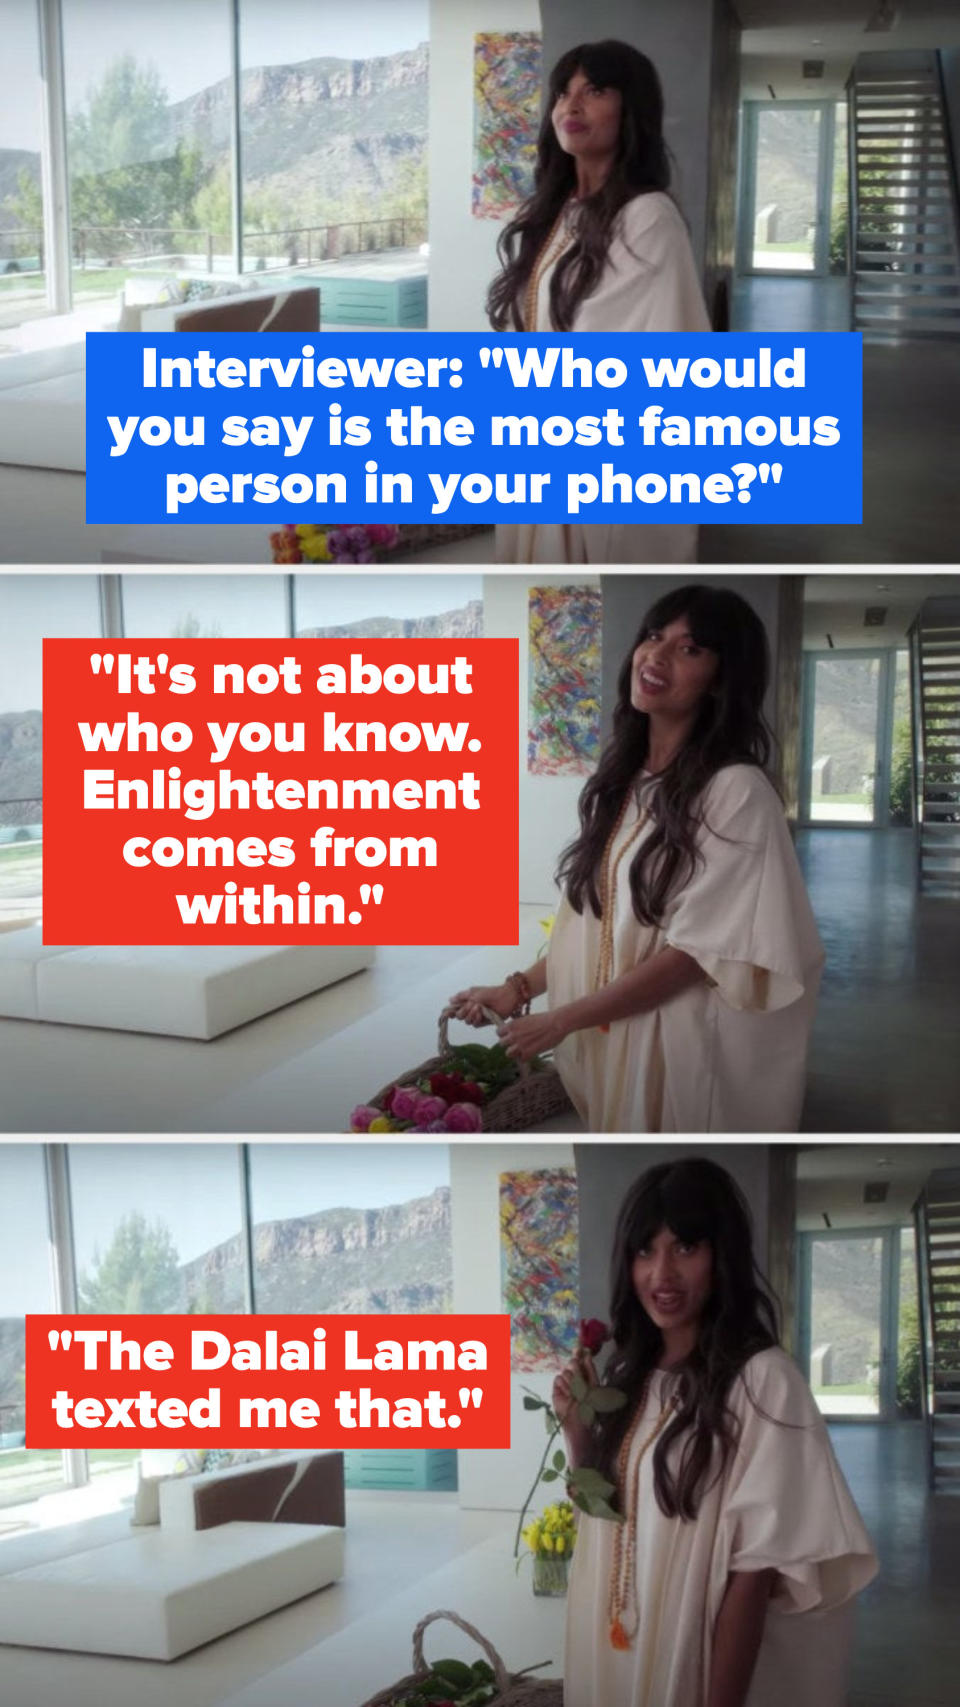 An interviewer asks, Who would you say is the most famous person in your phone, and Tahani says, It's not about who you know, enlightenment comes from within, the Dalai Lama texted me that